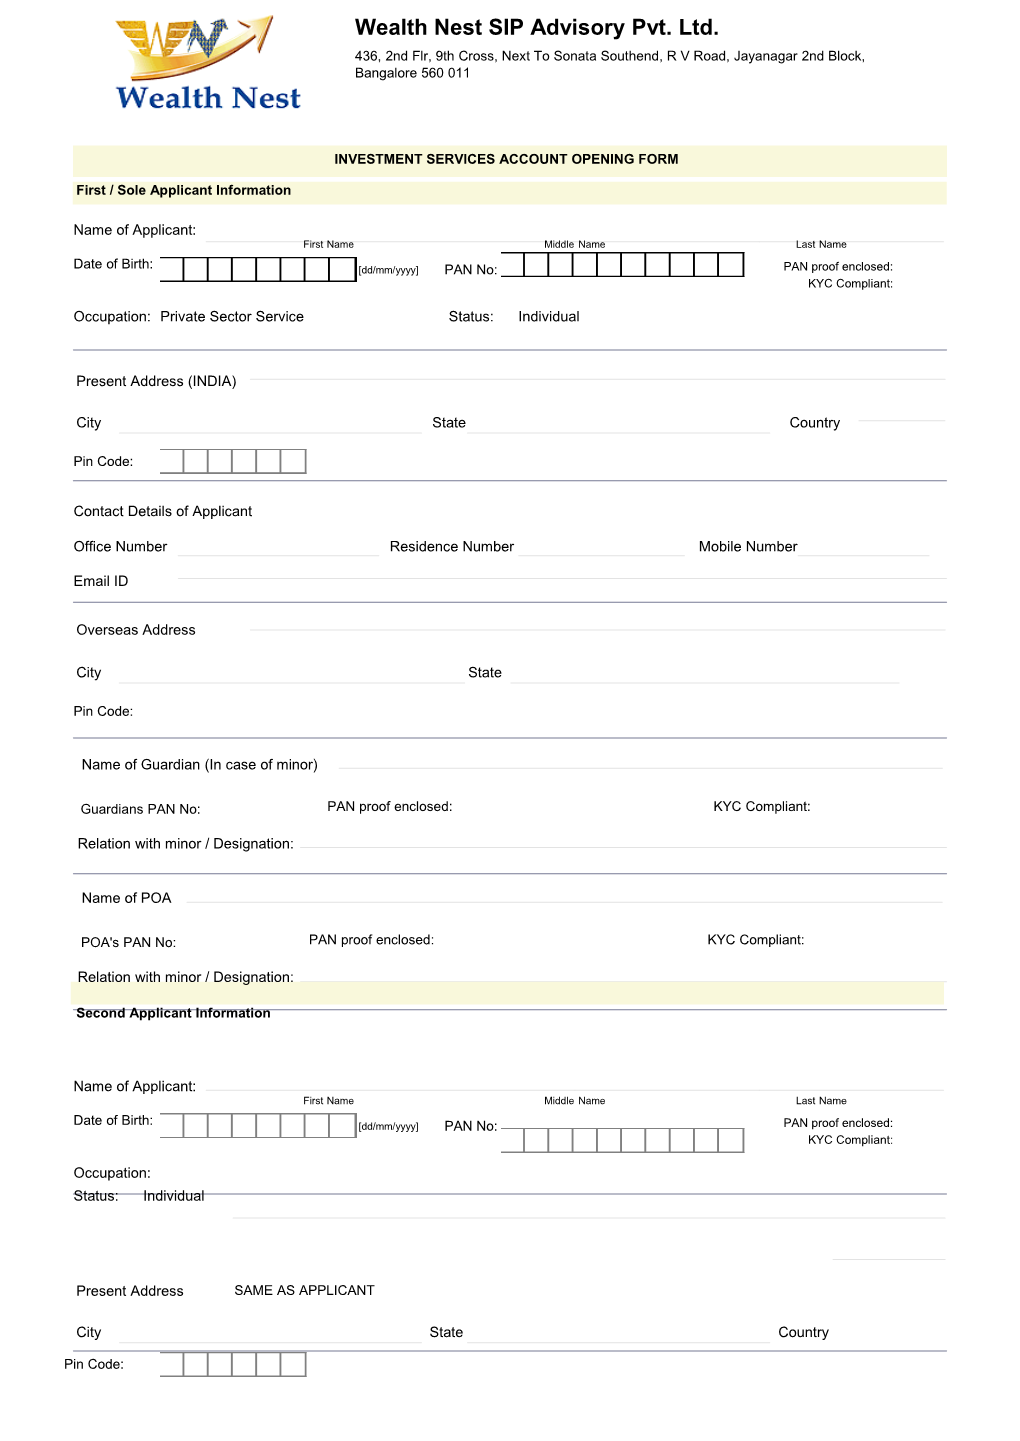 Investment Services Account Opening Form